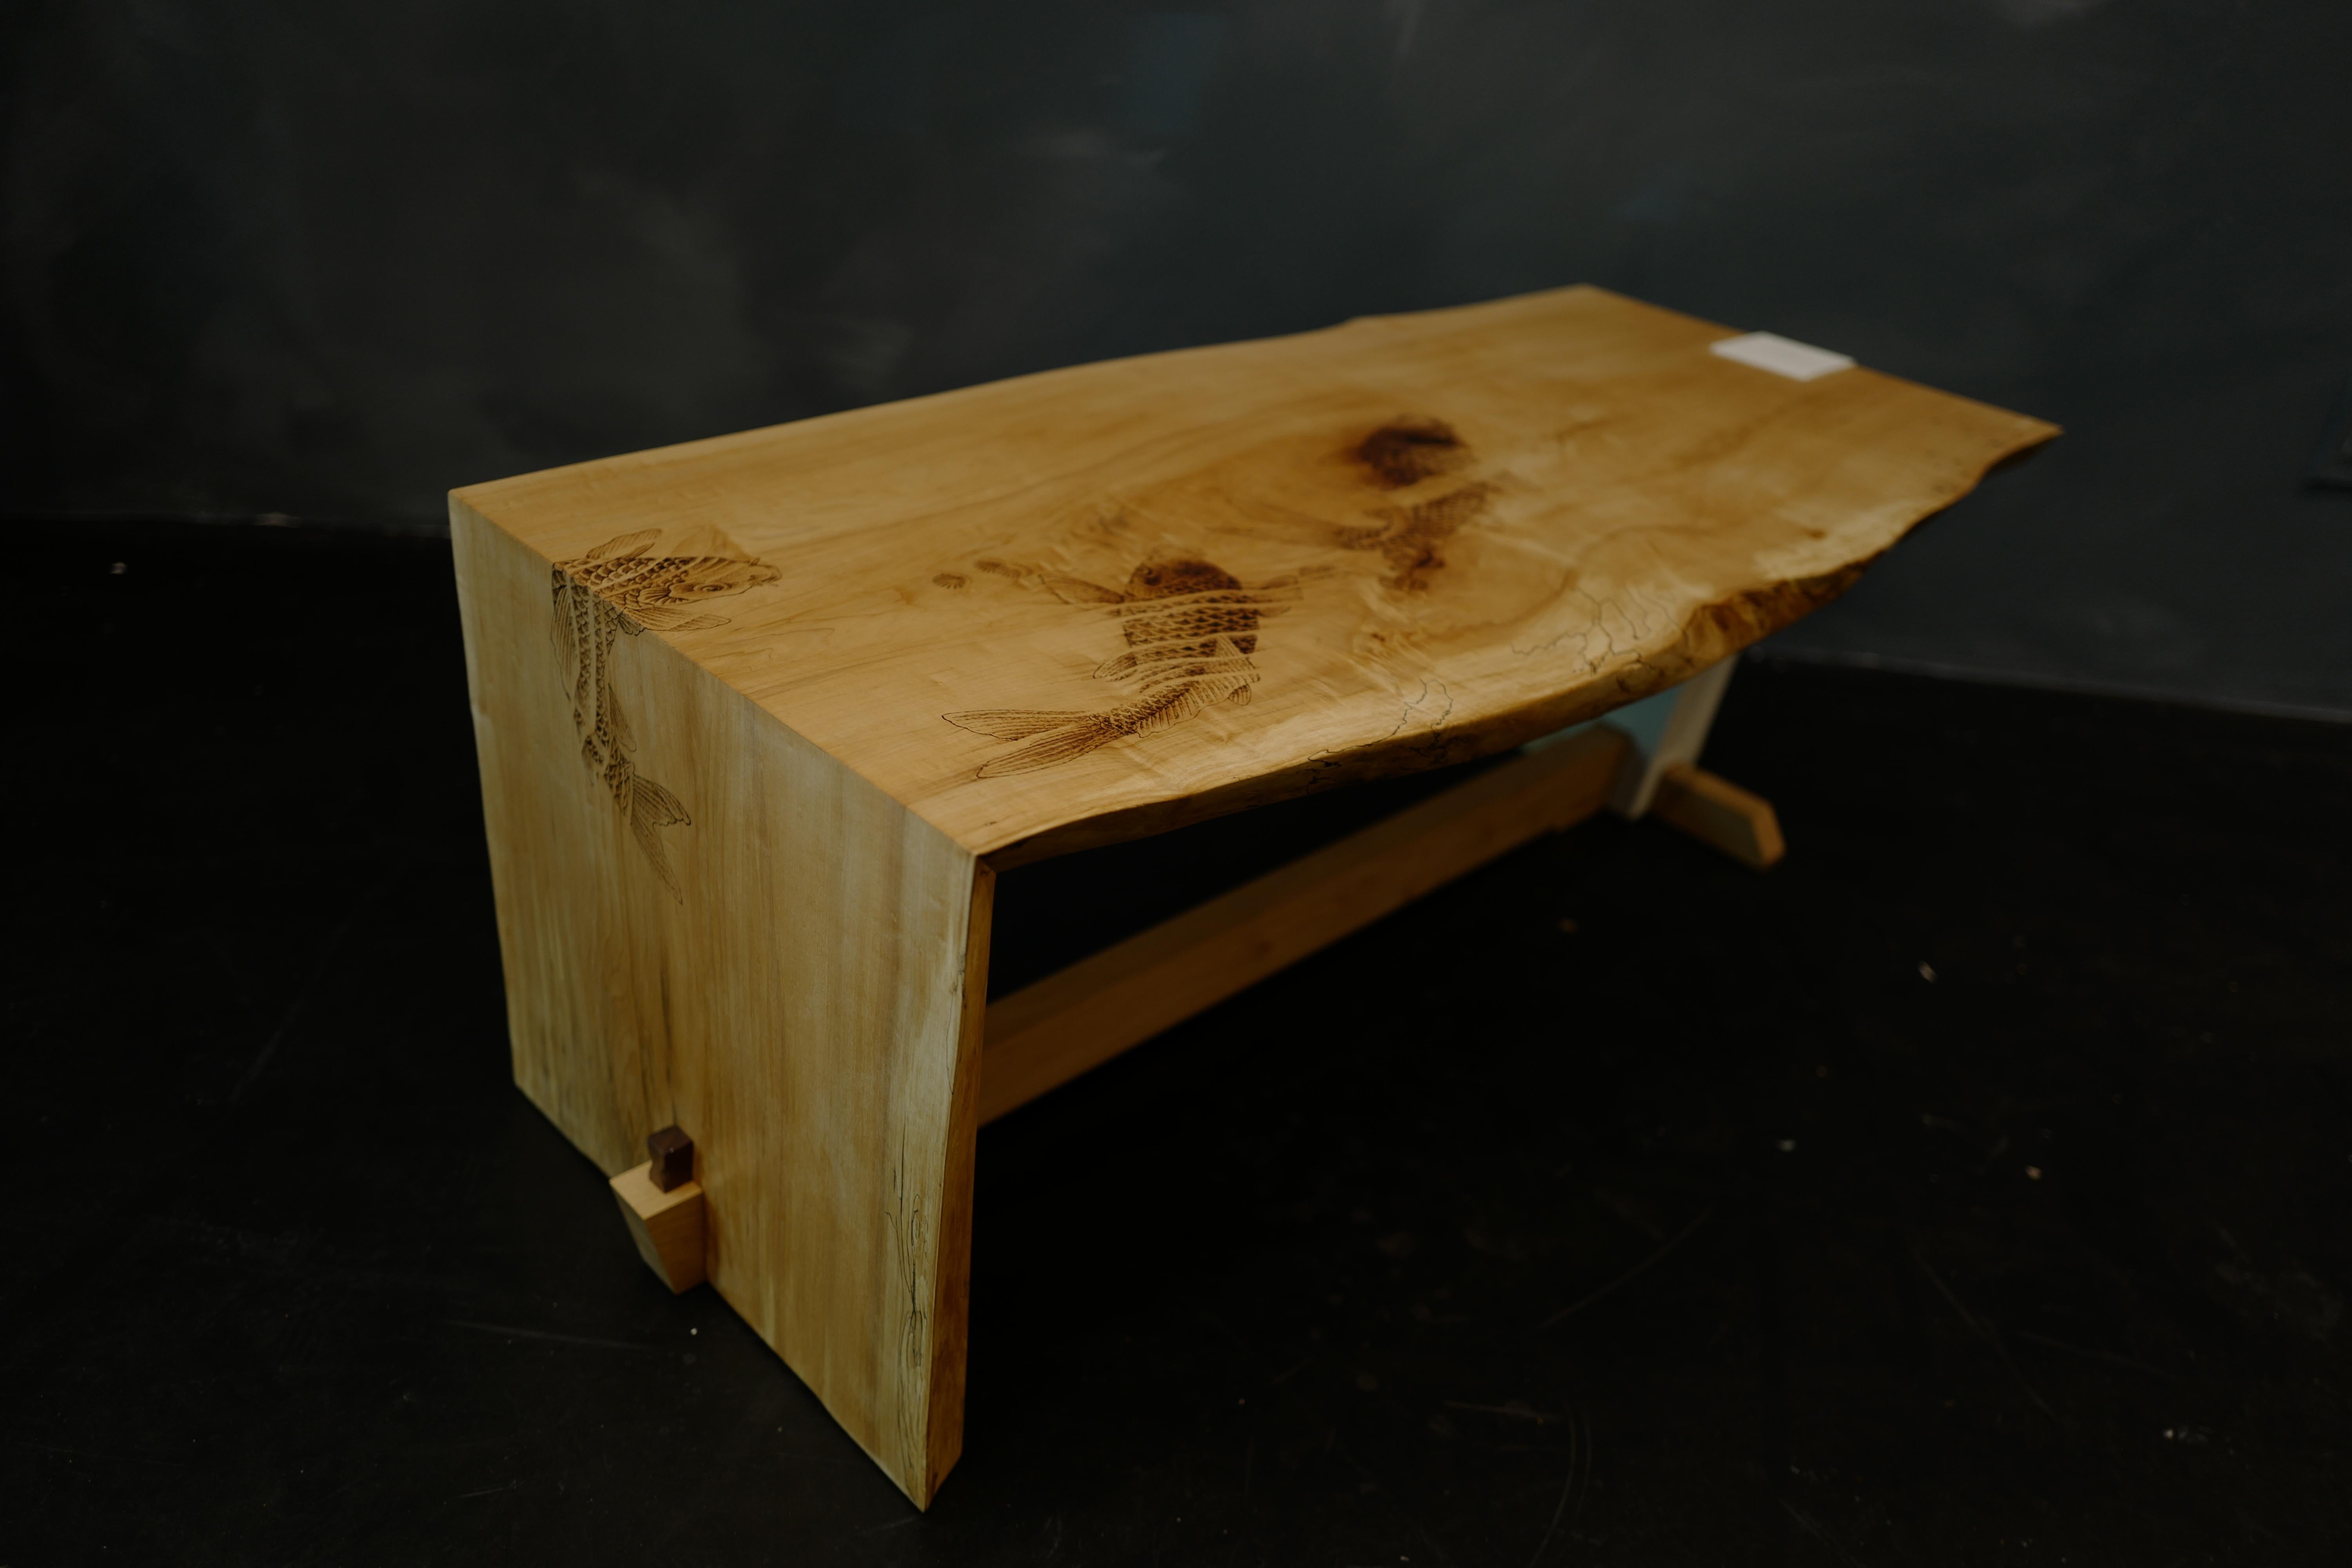 Spalted Maple Live Edge Coffee Table With Koi Fish Pyrography By Chris Garver In New Condition For Sale In New York, NY